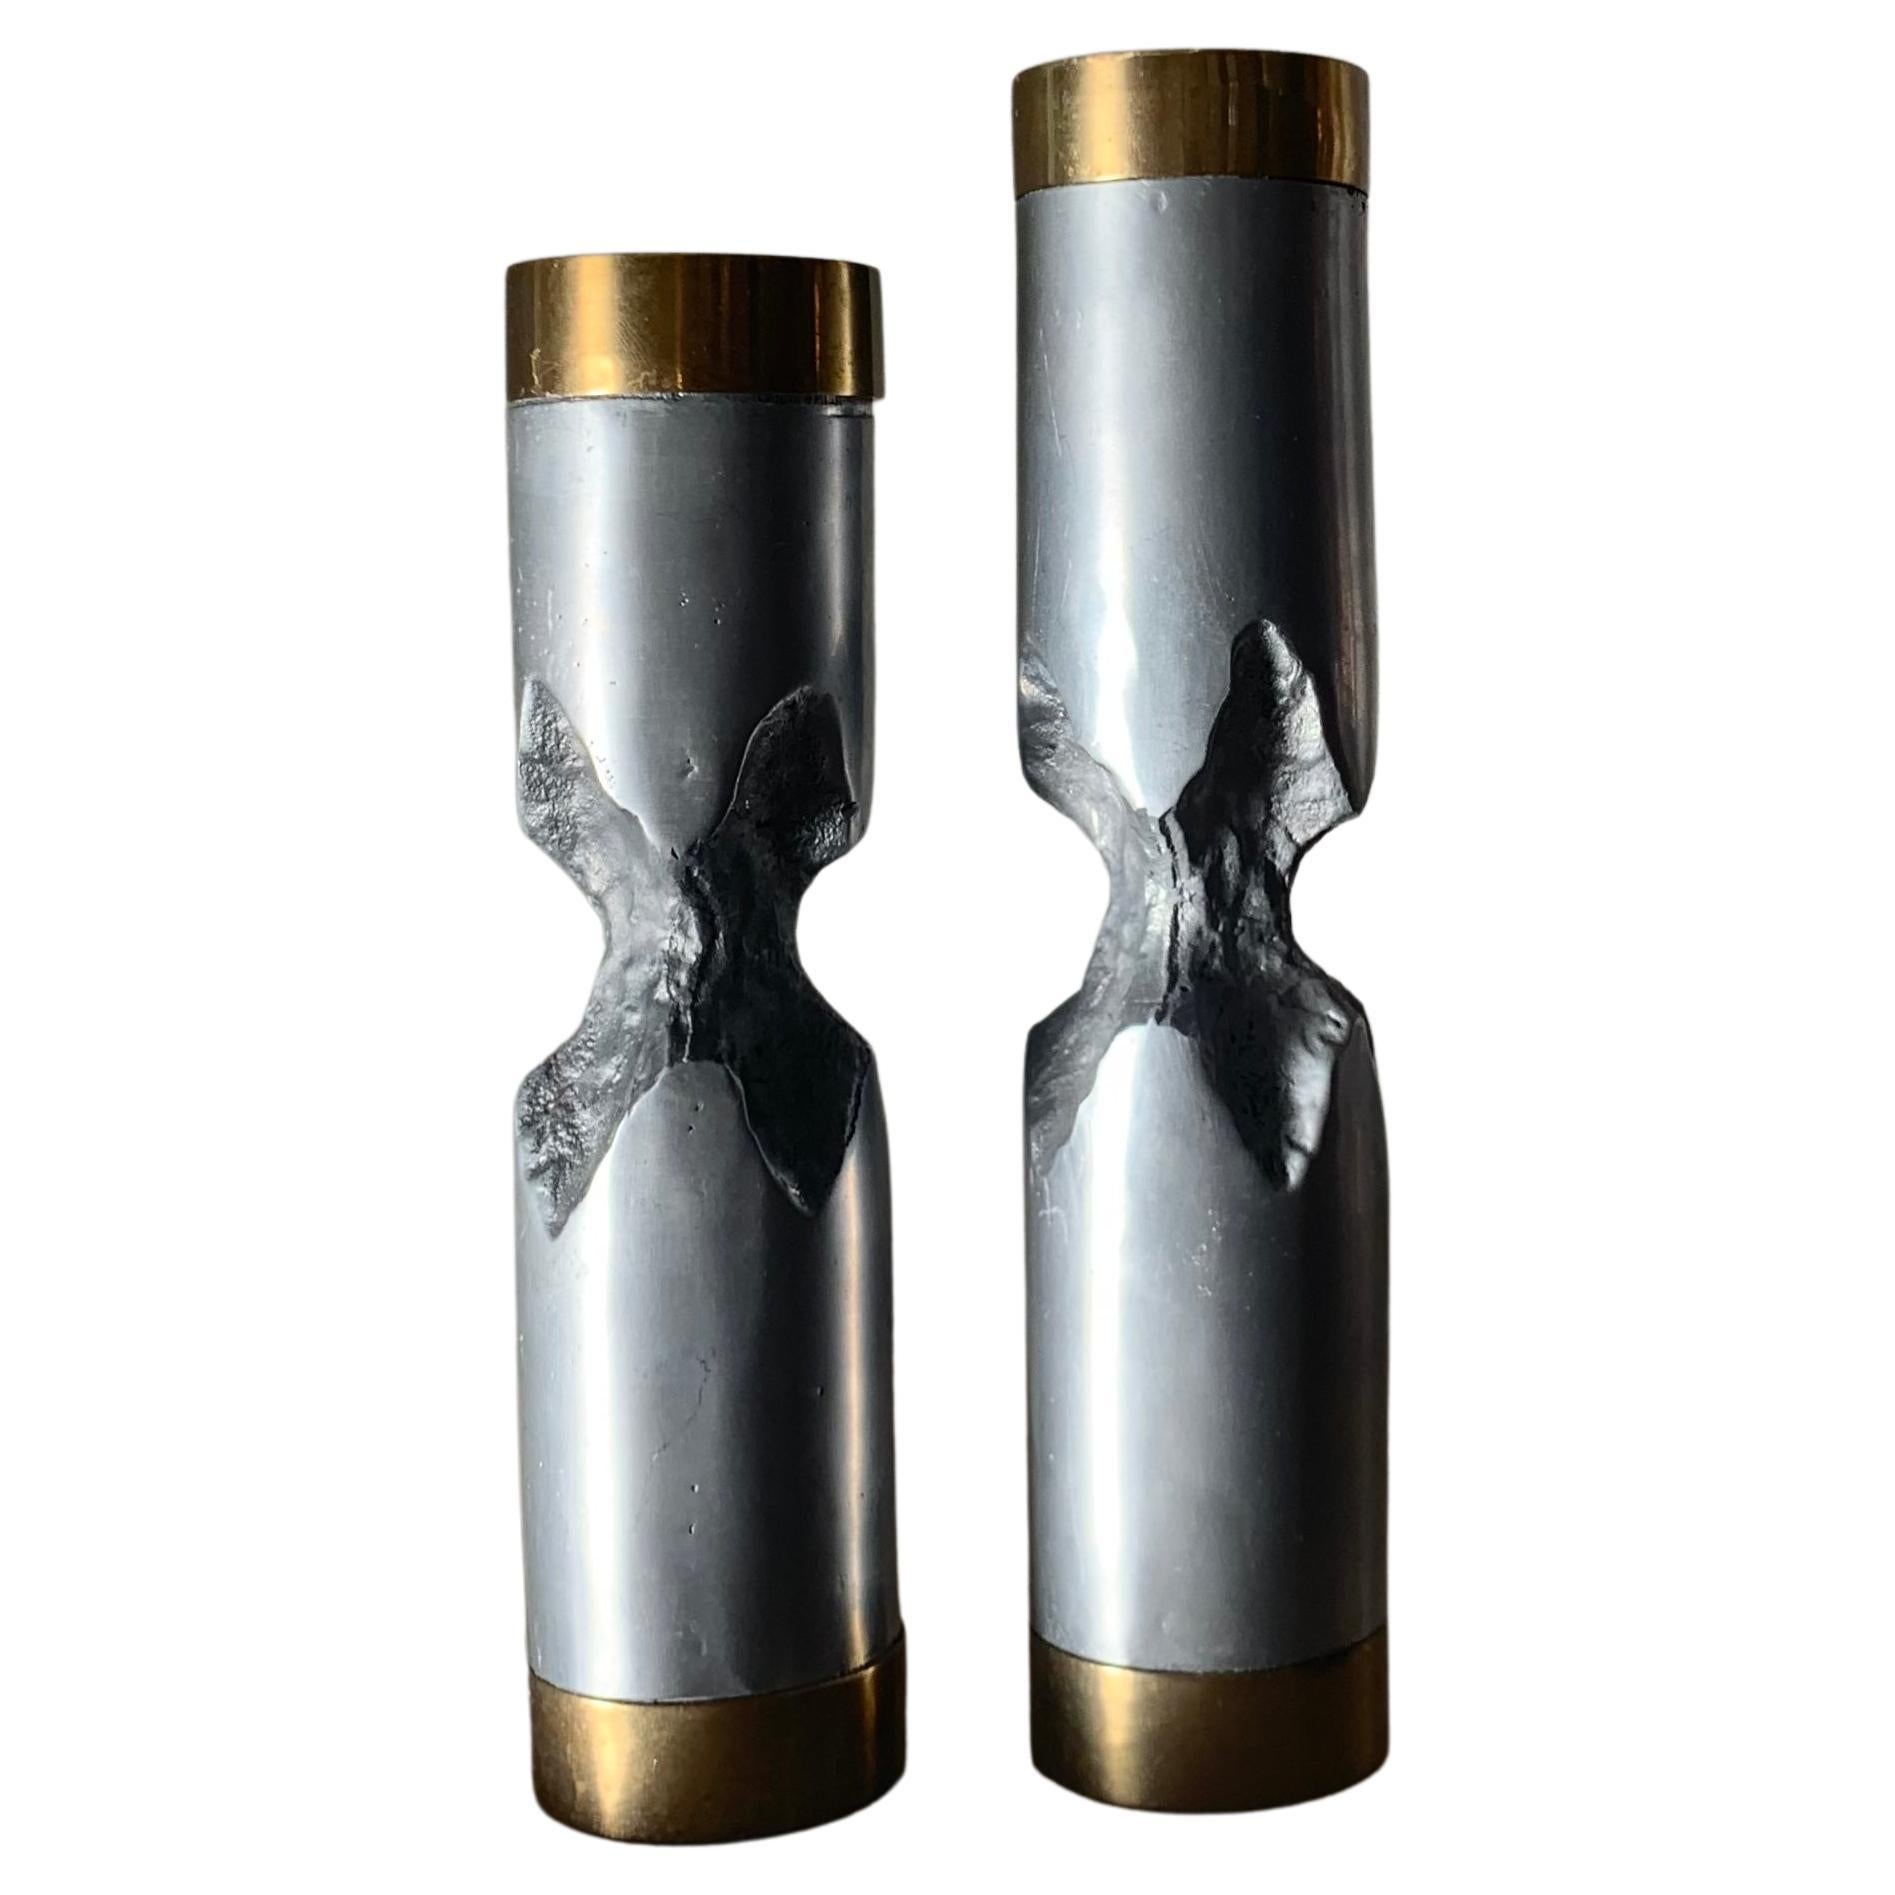 Pair of David Marshall Brutalist Metal Candlesticks, 1970s For Sale